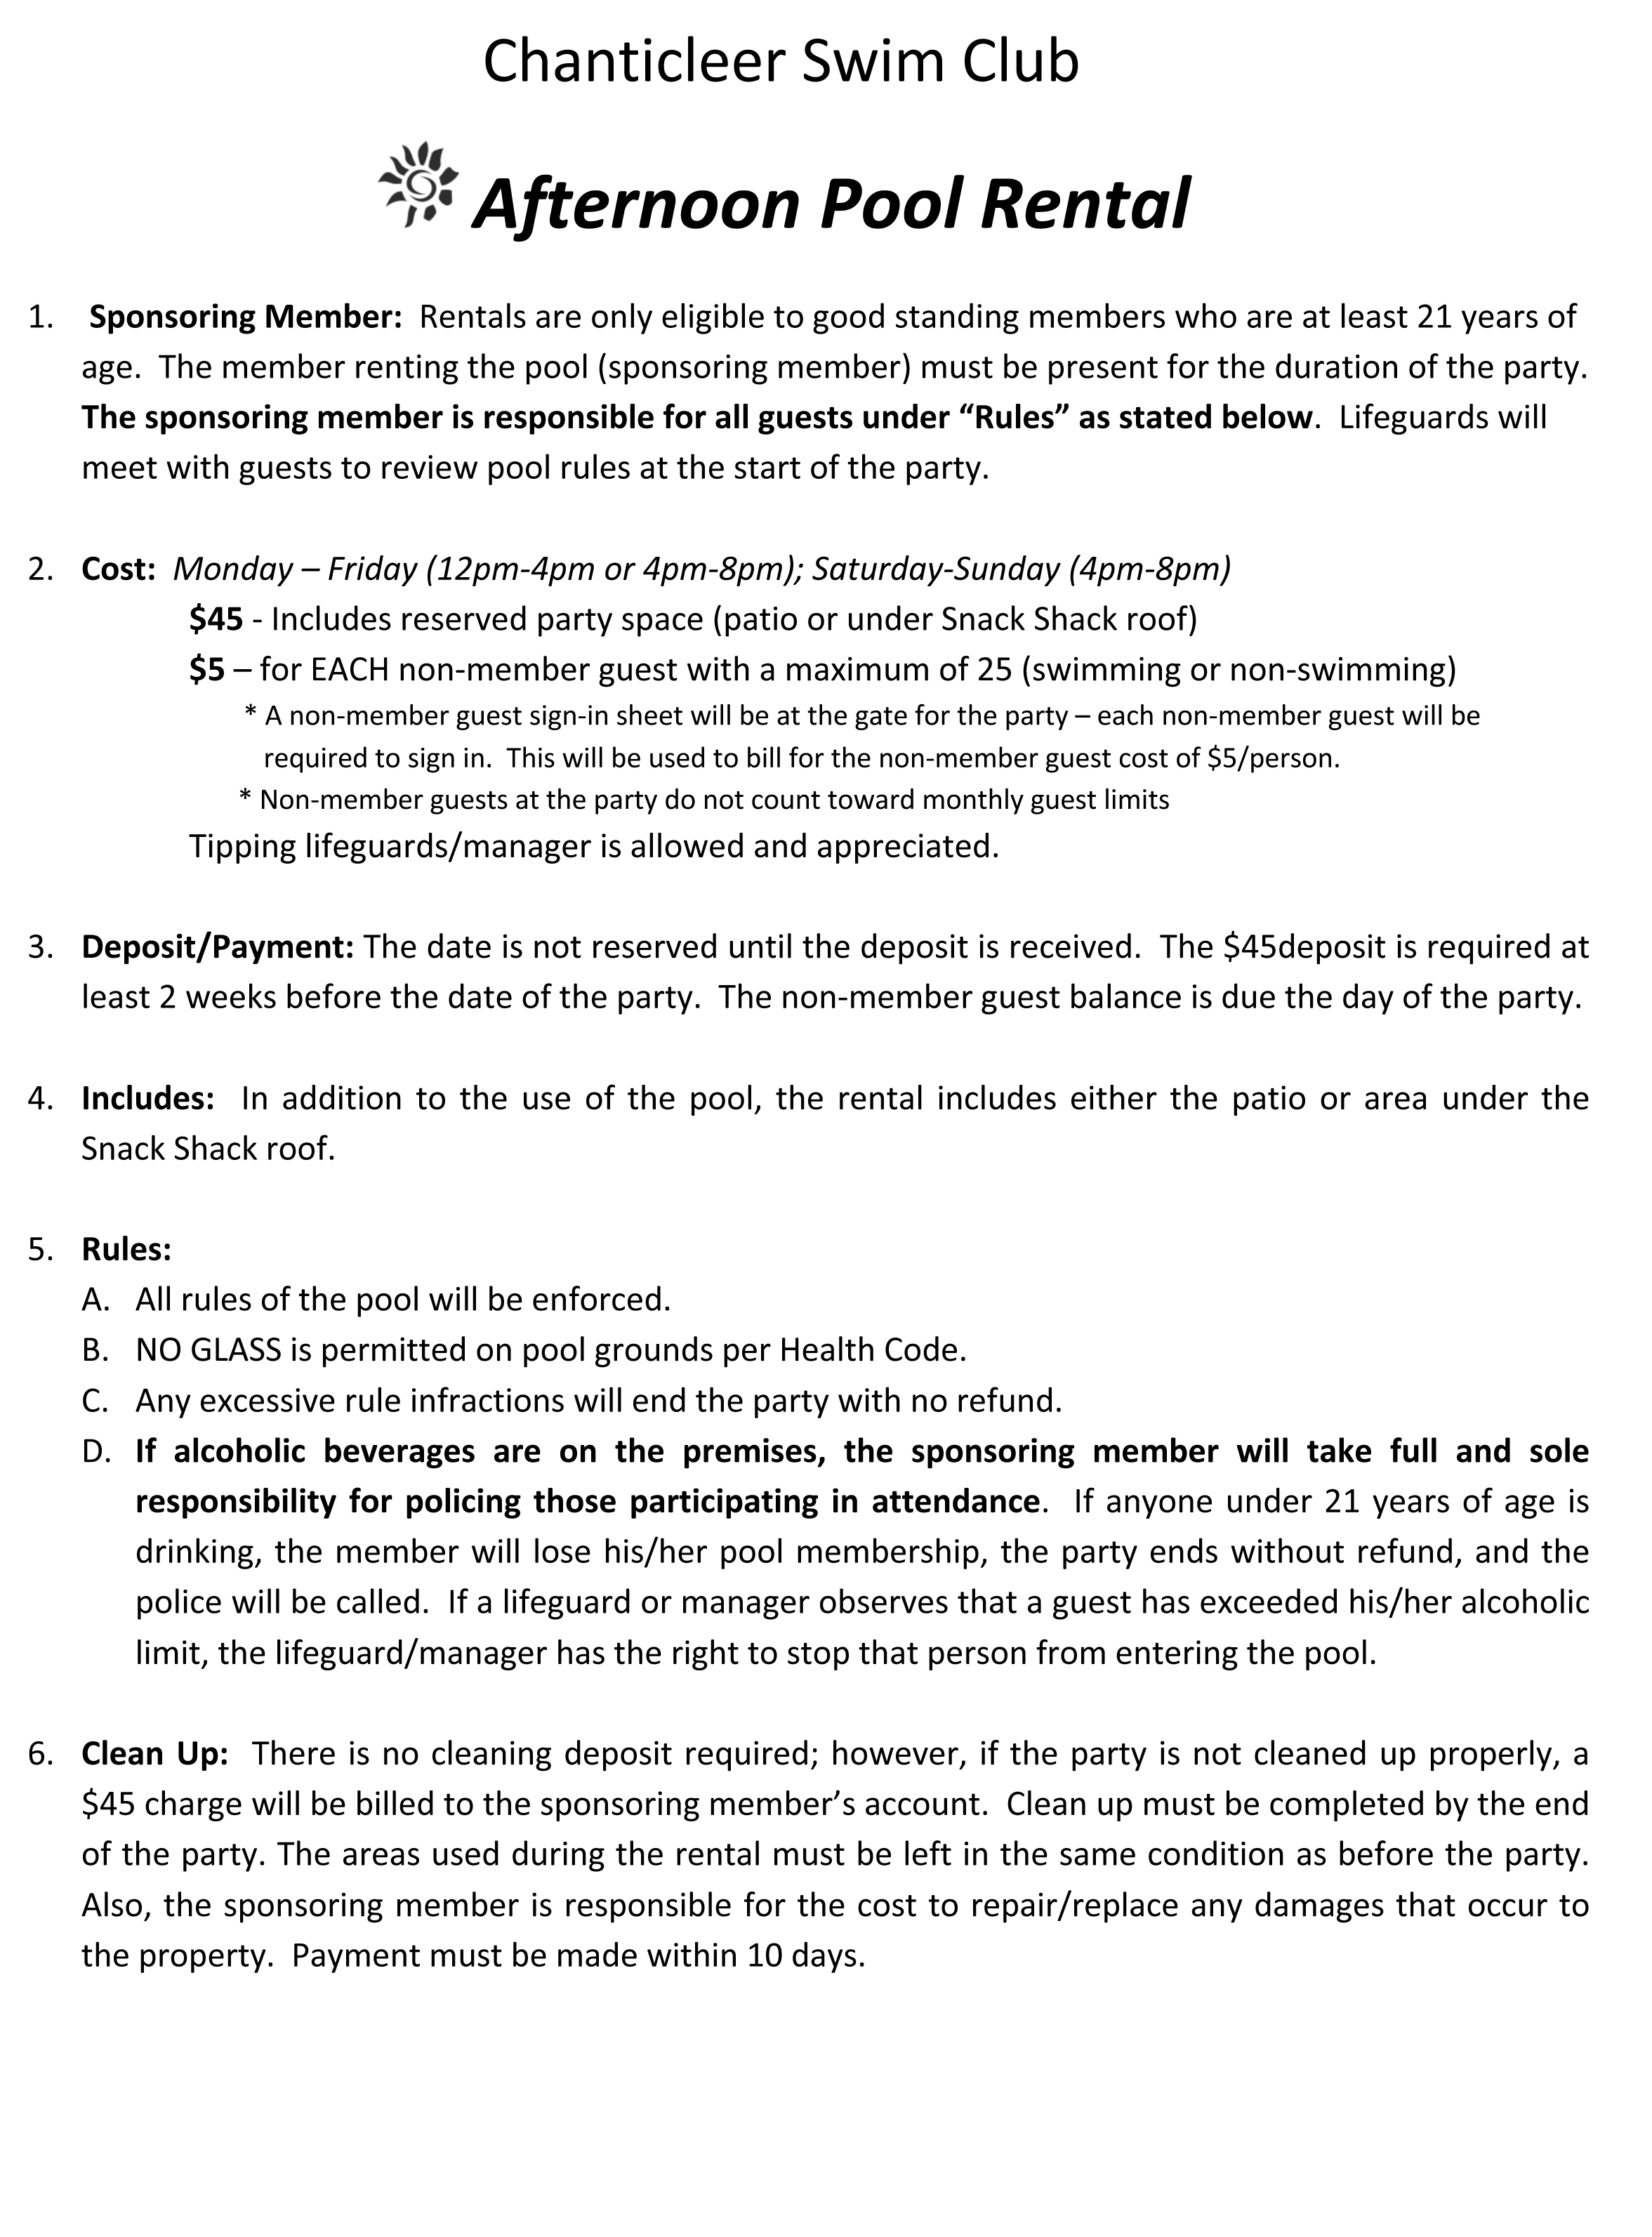 Afternoon Party Agreement page 1